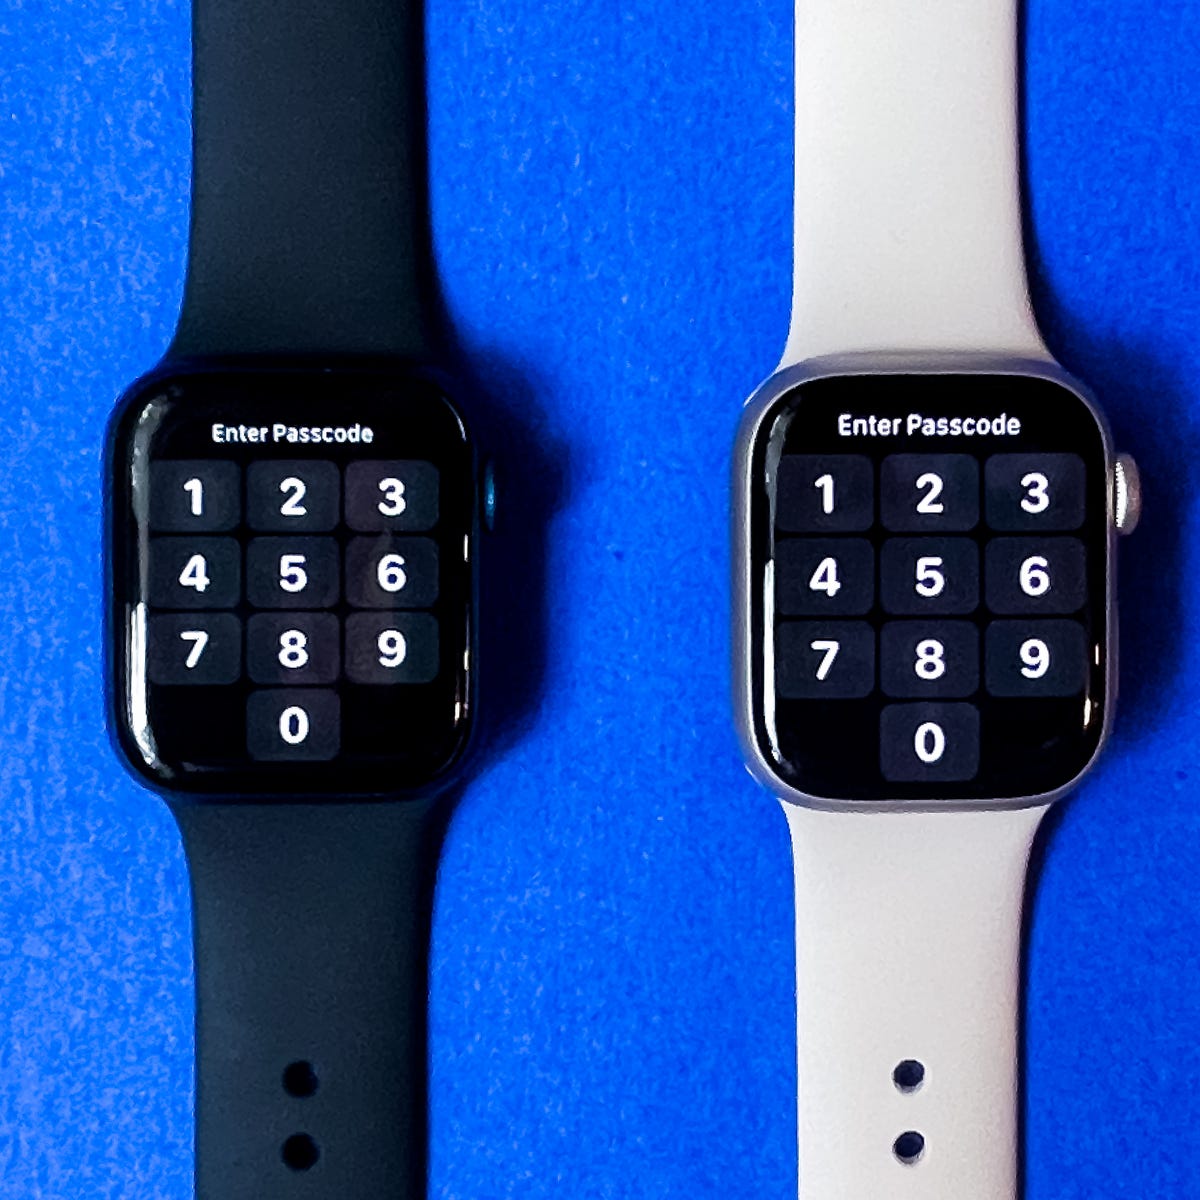 Apple Watch Series 7 review: bigger screen, faster charging, still the best, Apple Watch